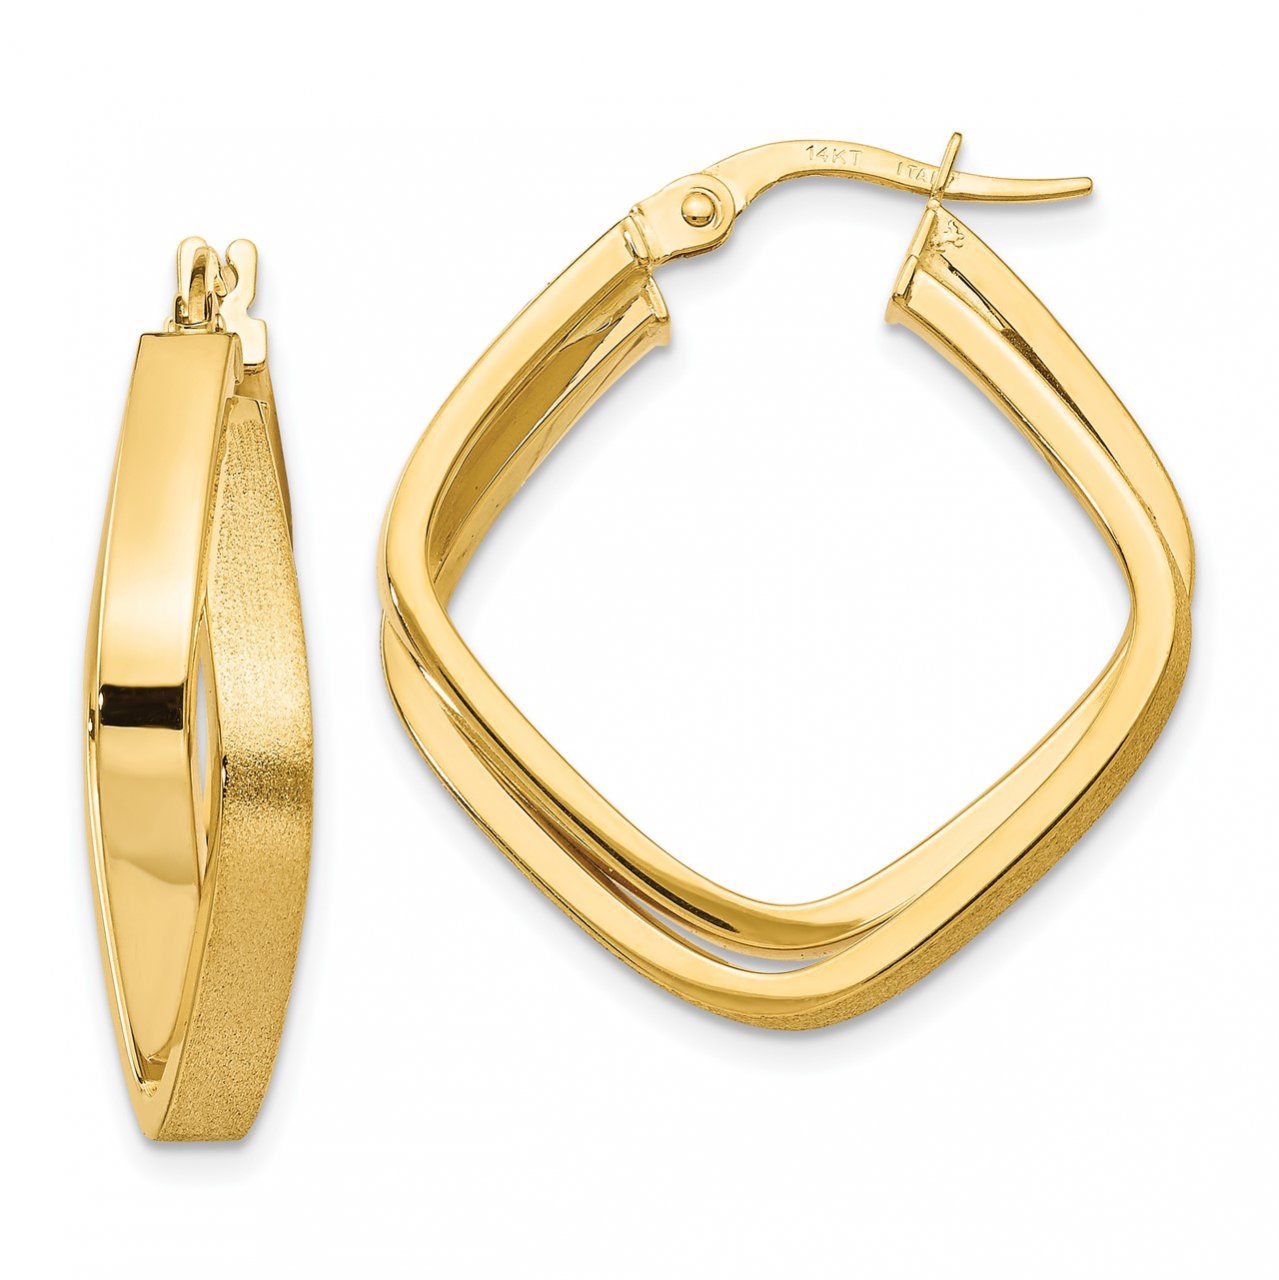 Leslie's 14K Polished and Scratch-finish Square Hoop Earrings